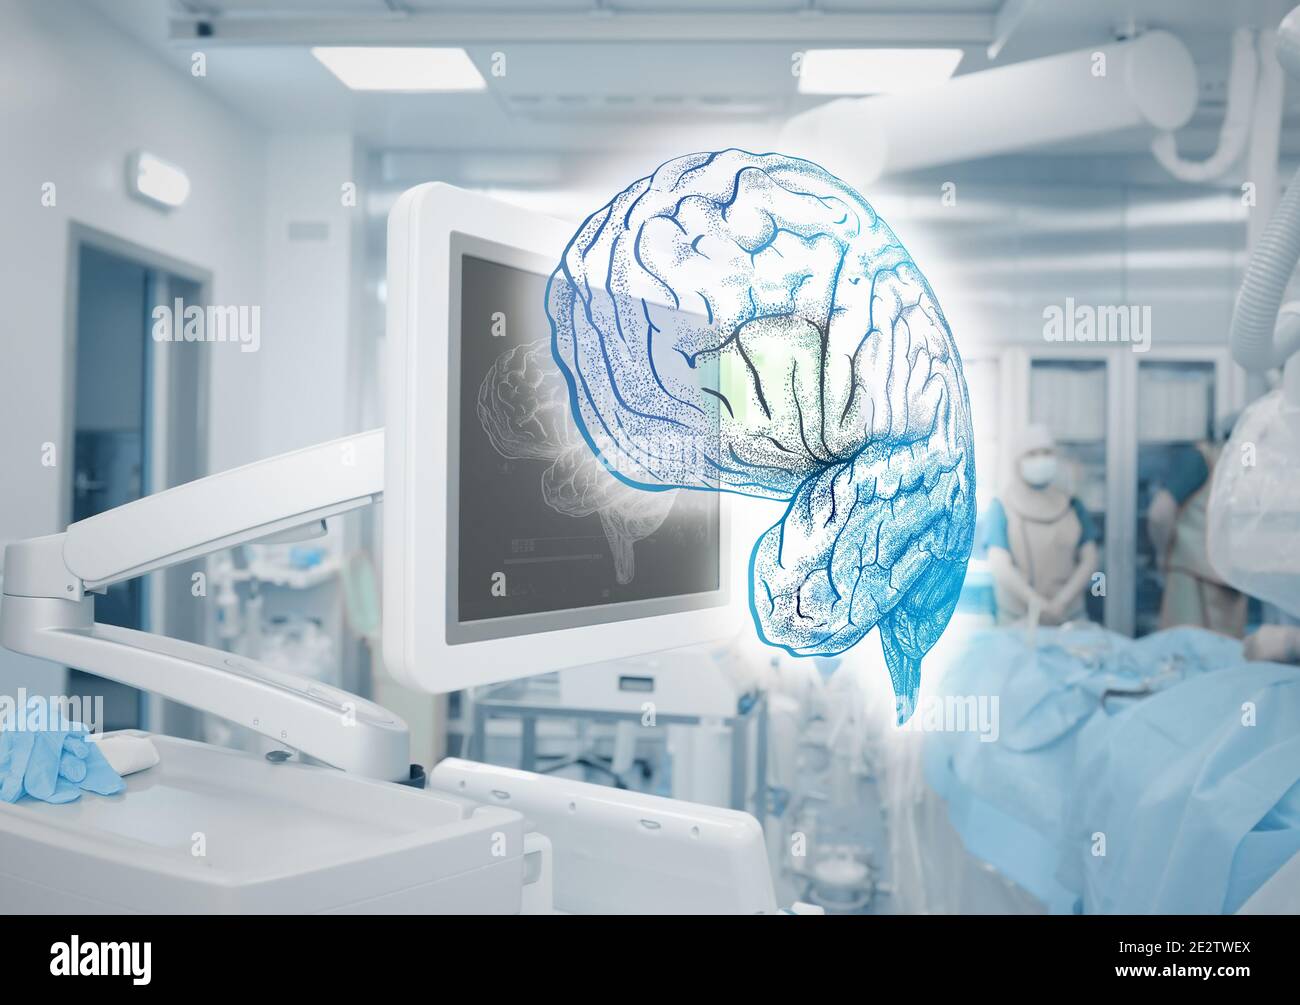 Modern monitoring equipment in the operating room. Stock Photo